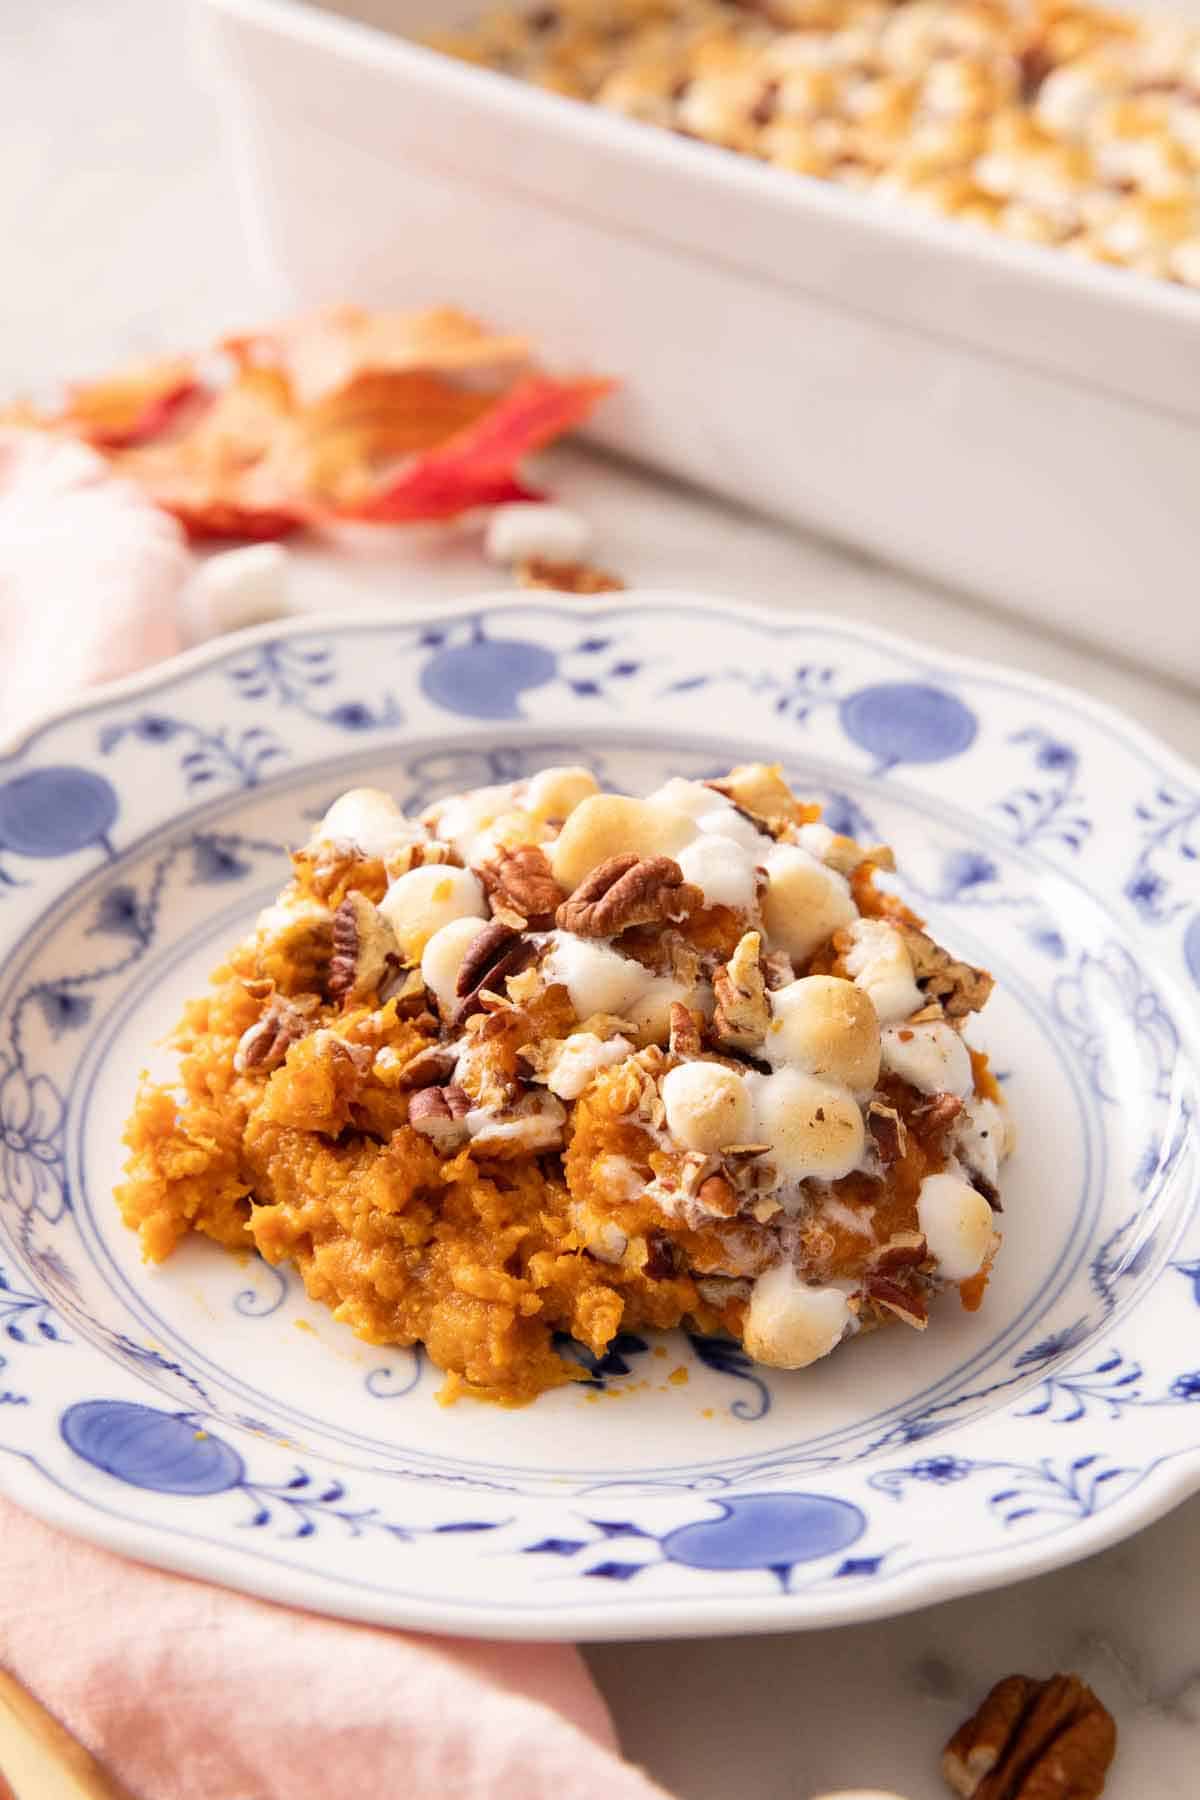 A close up view of a plate of sweet potato casserole with a backing dish in the background, out of focus.